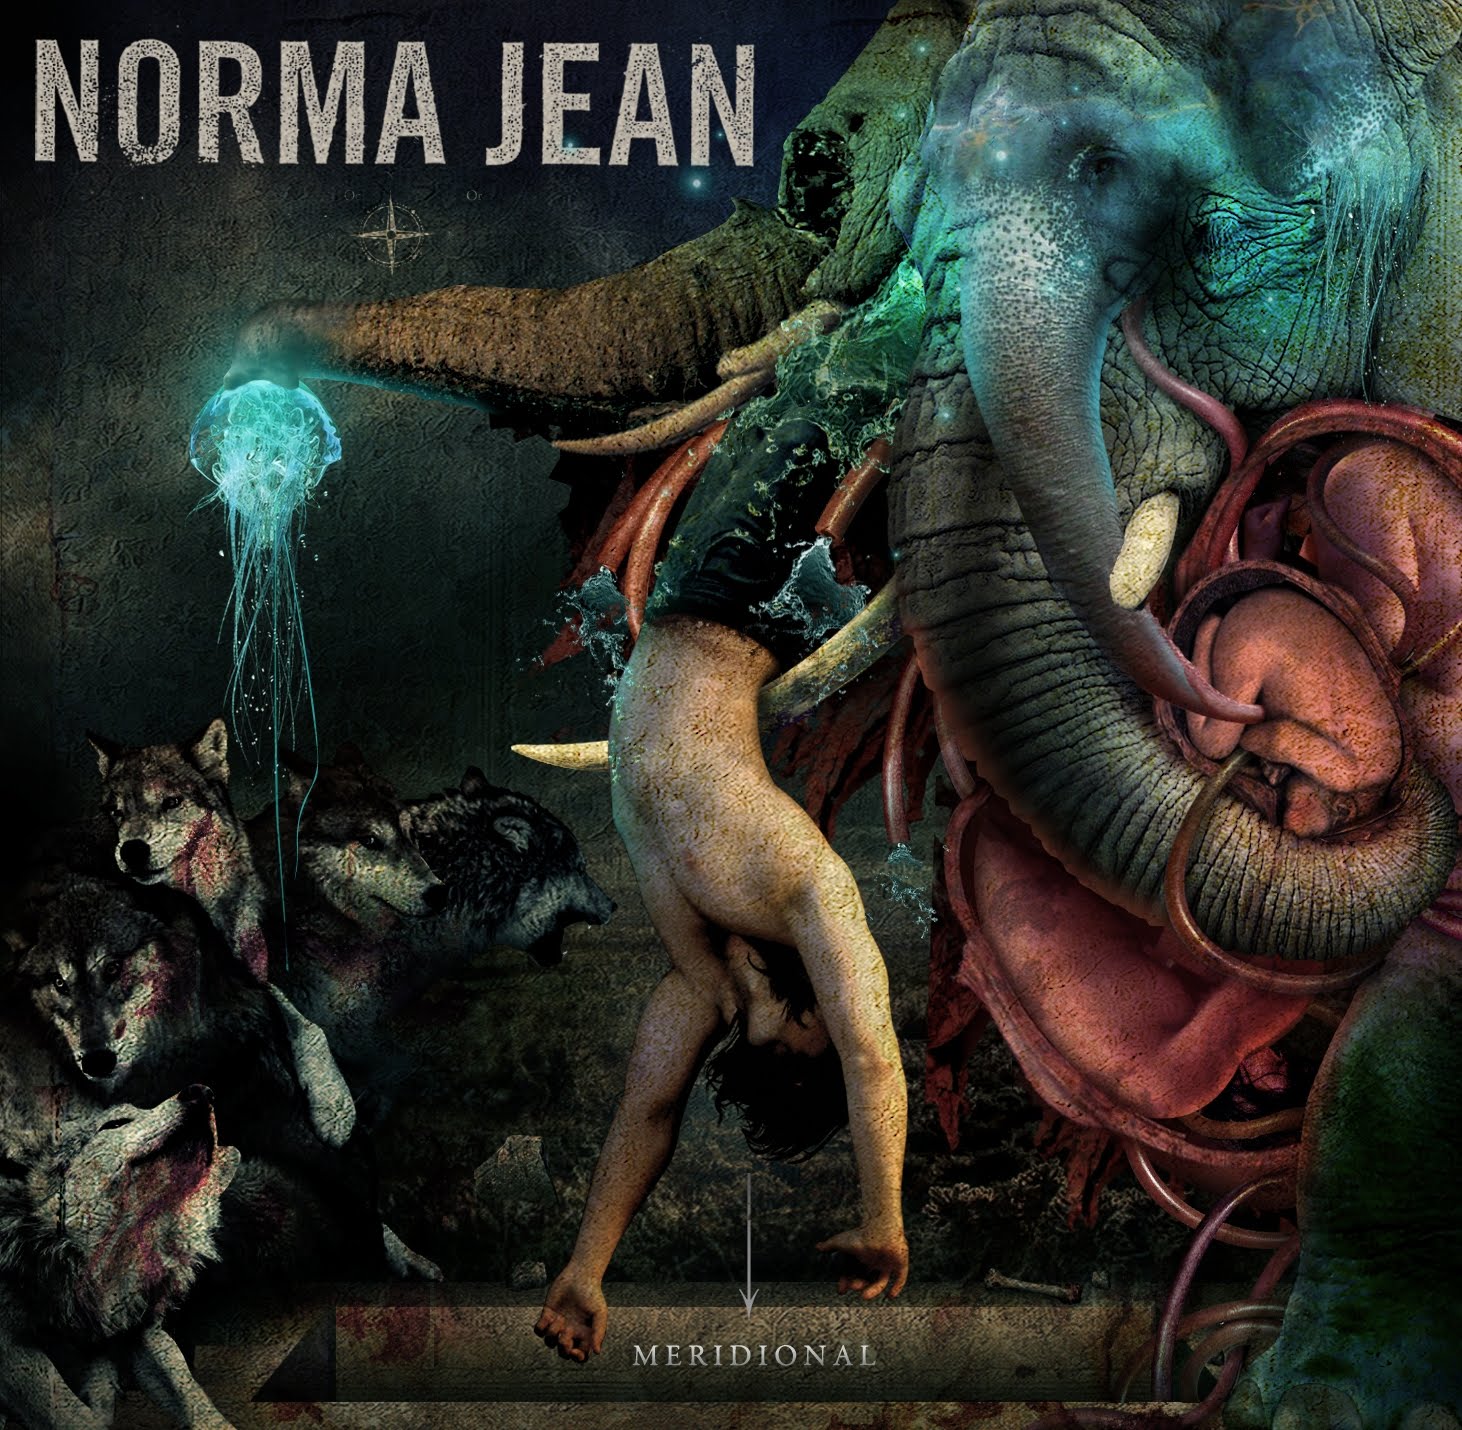 Don't Count On It Reviews: Norma Jean - Meridional